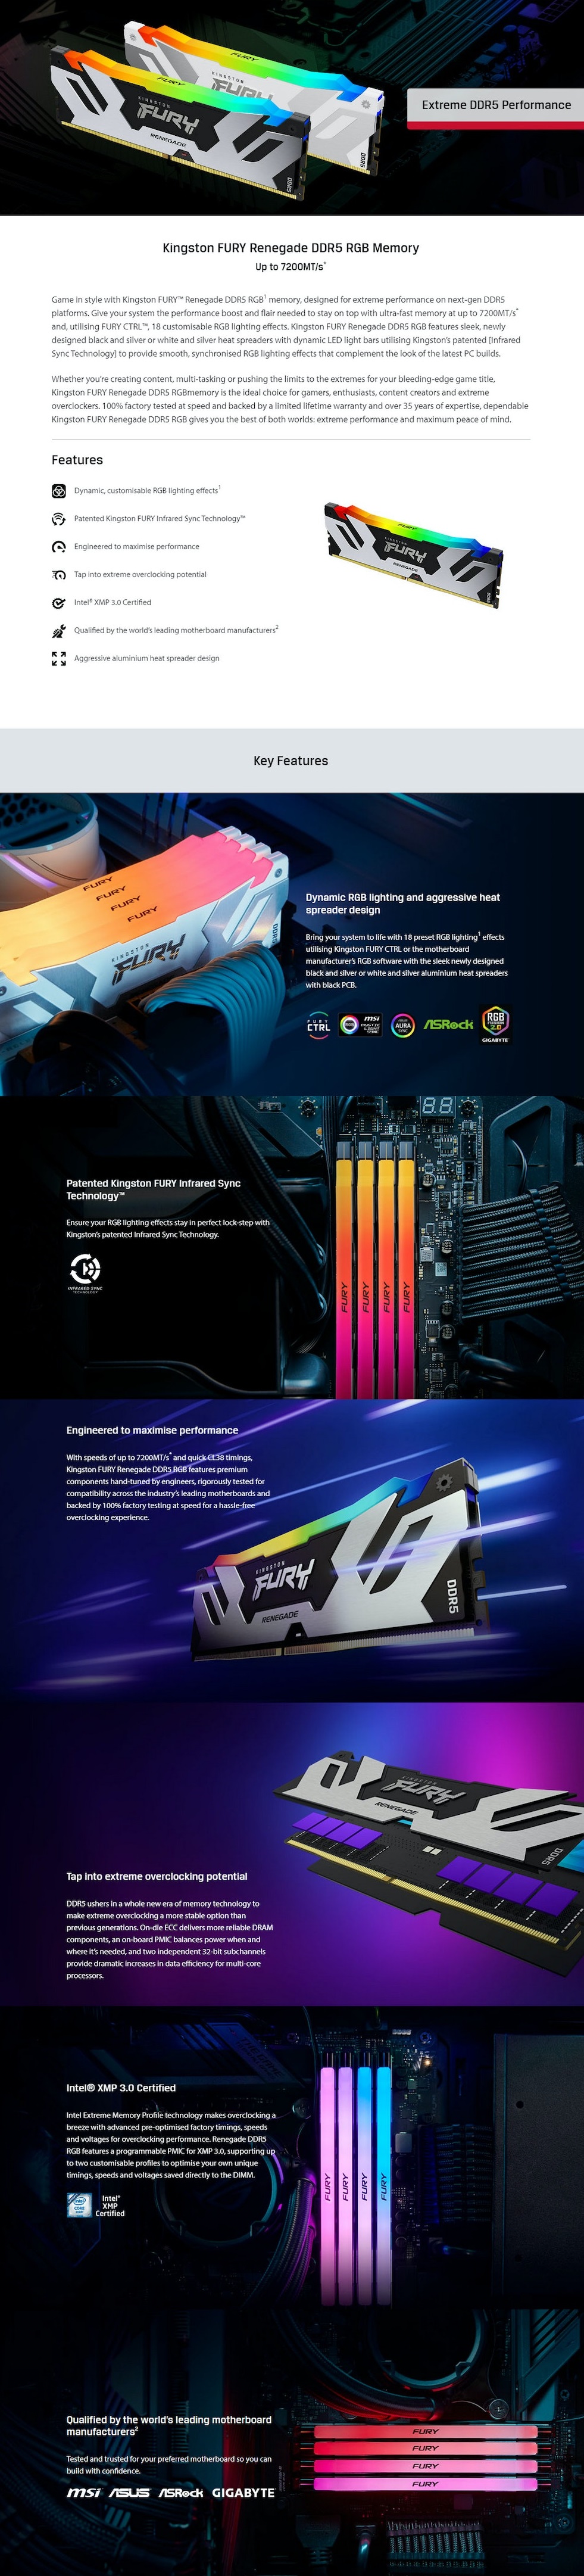 A large marketing image providing additional information about the product Kingston 48GB Kit (2x24GB) DDR5 Fury Renegade RGB CL32 6400Mhz - Black - Additional alt info not provided